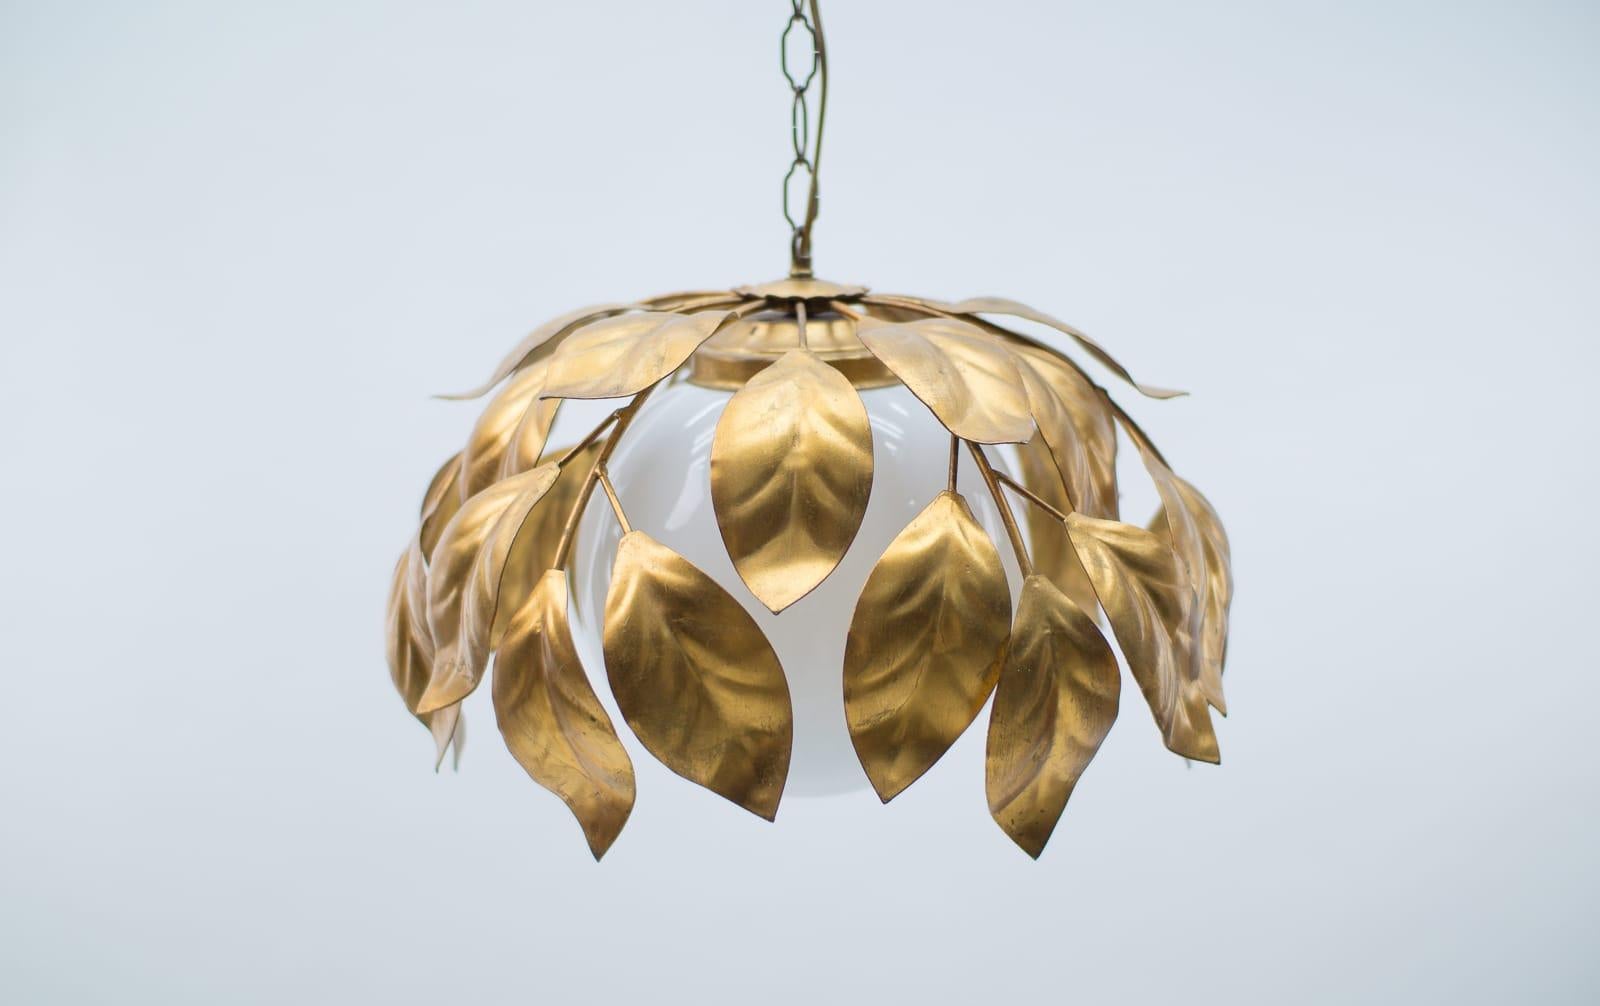 Gilt Nice Gilded Florentine Ceiling Lamp with Opaline Glass Globe Shade, Italy, 1960s For Sale